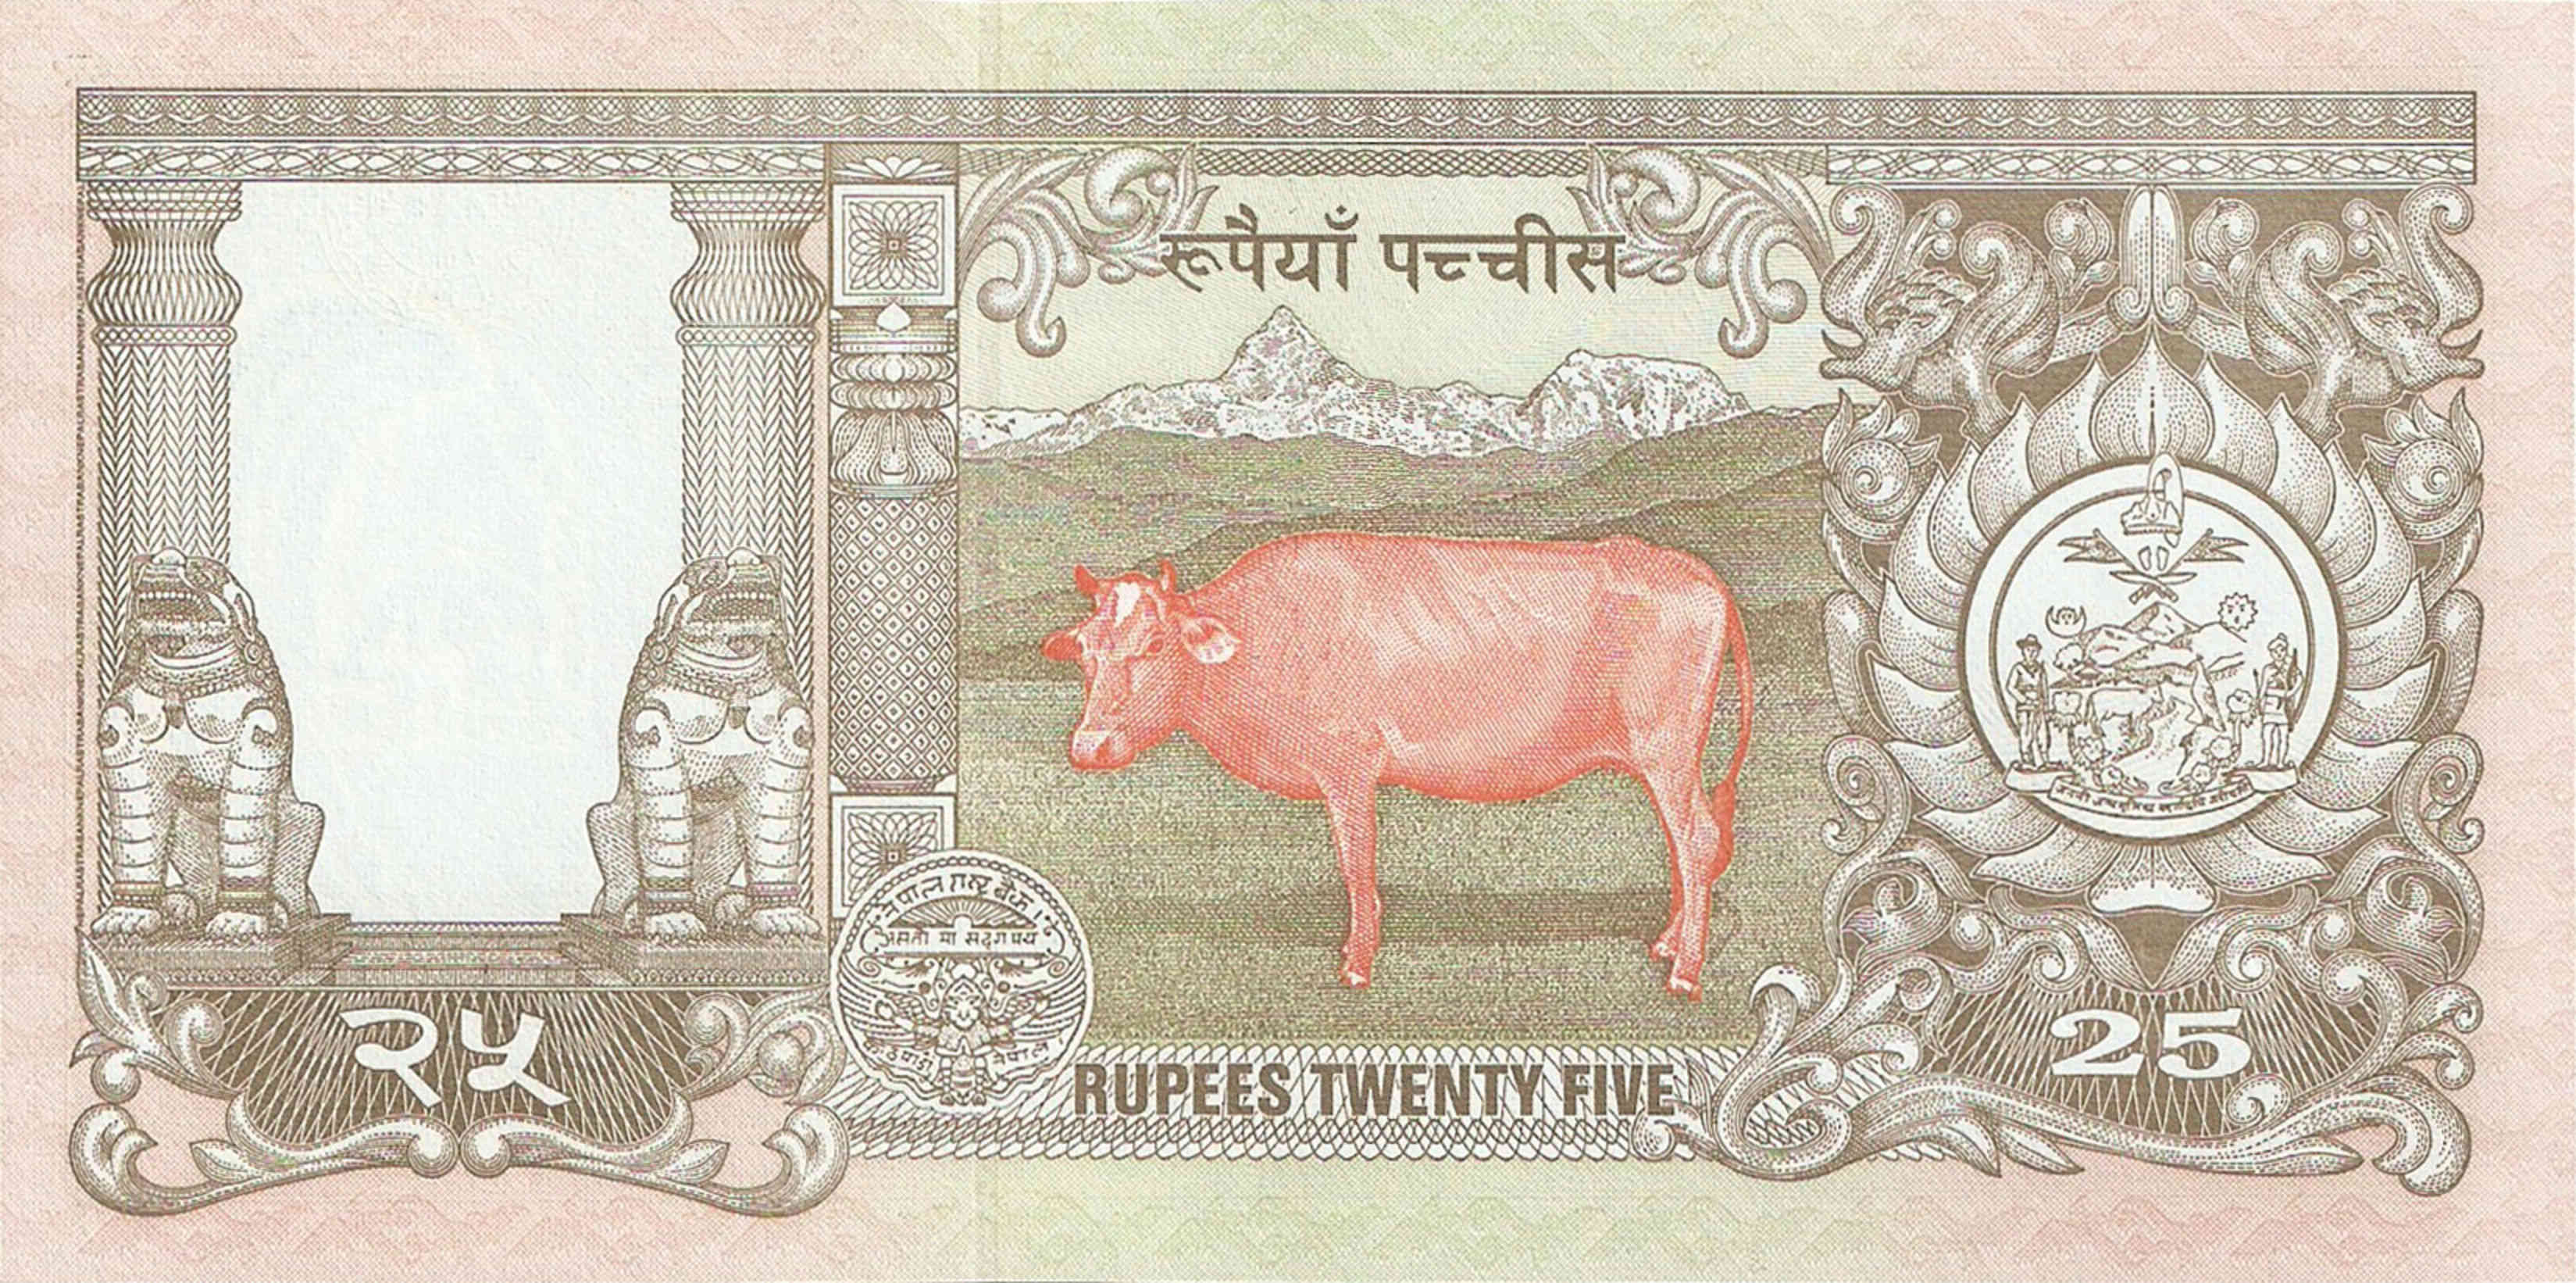 NEPAL 25 RUPEES P 41 UNC WITH OFFICIAL FOLDER 